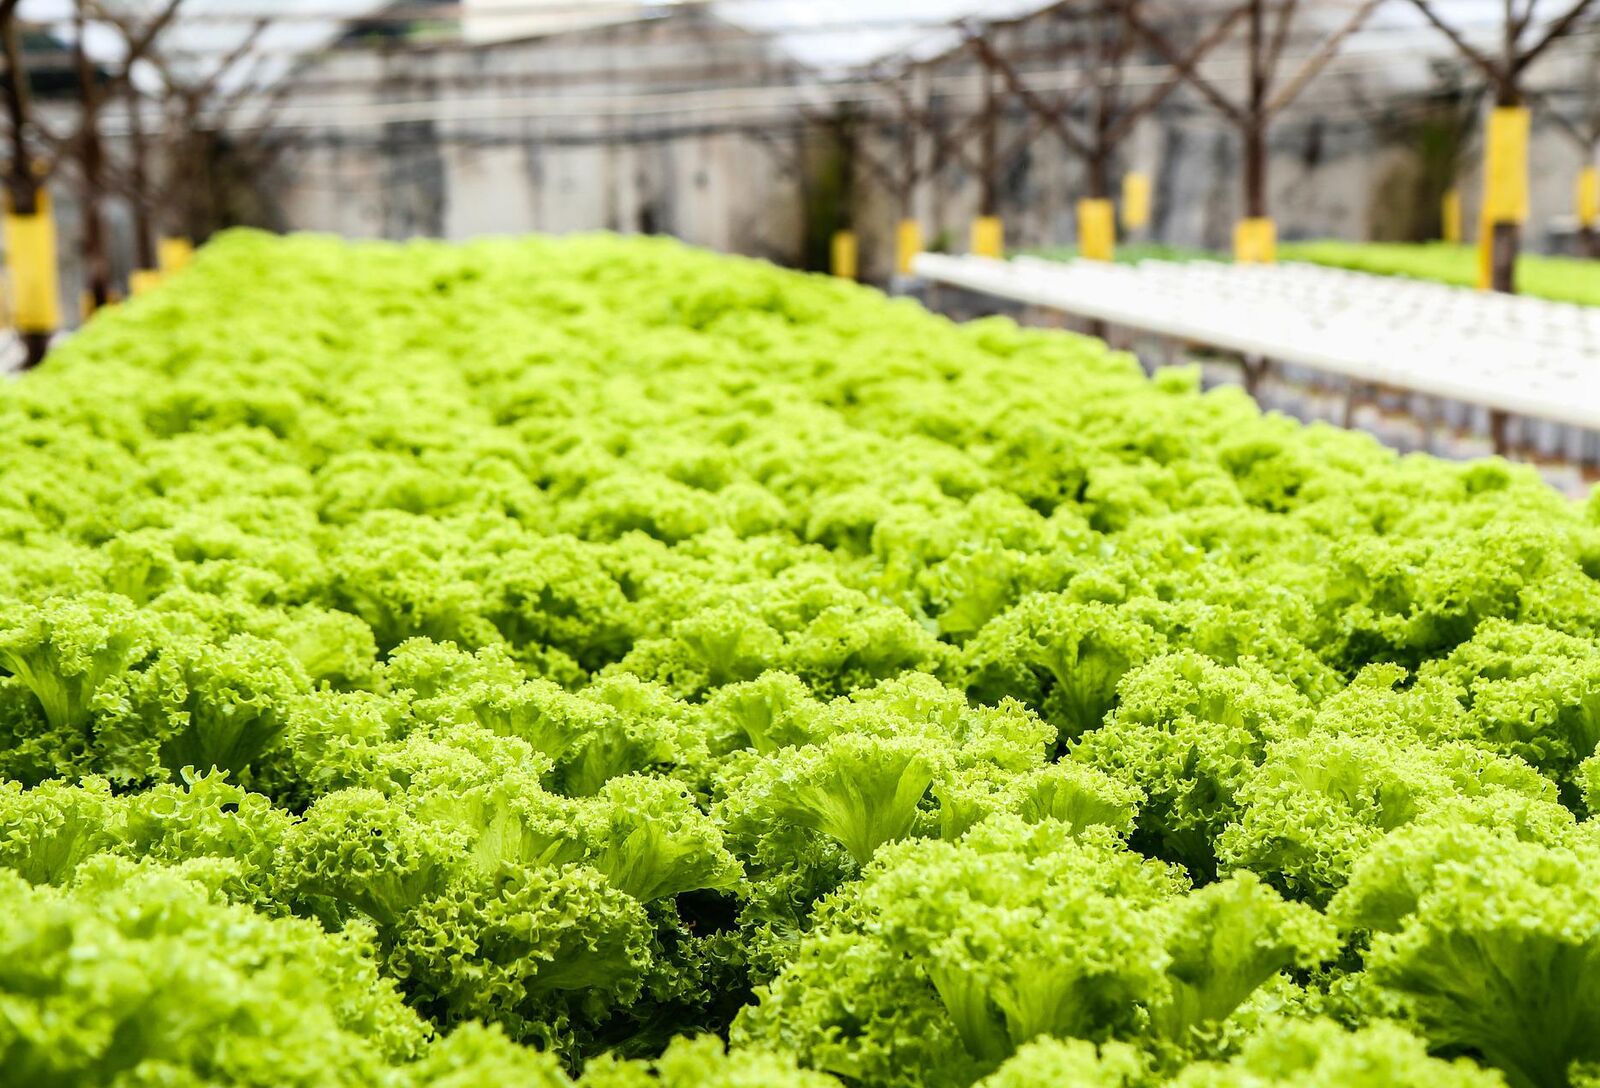 The UK's largest vertical farm has been given the go-ahead